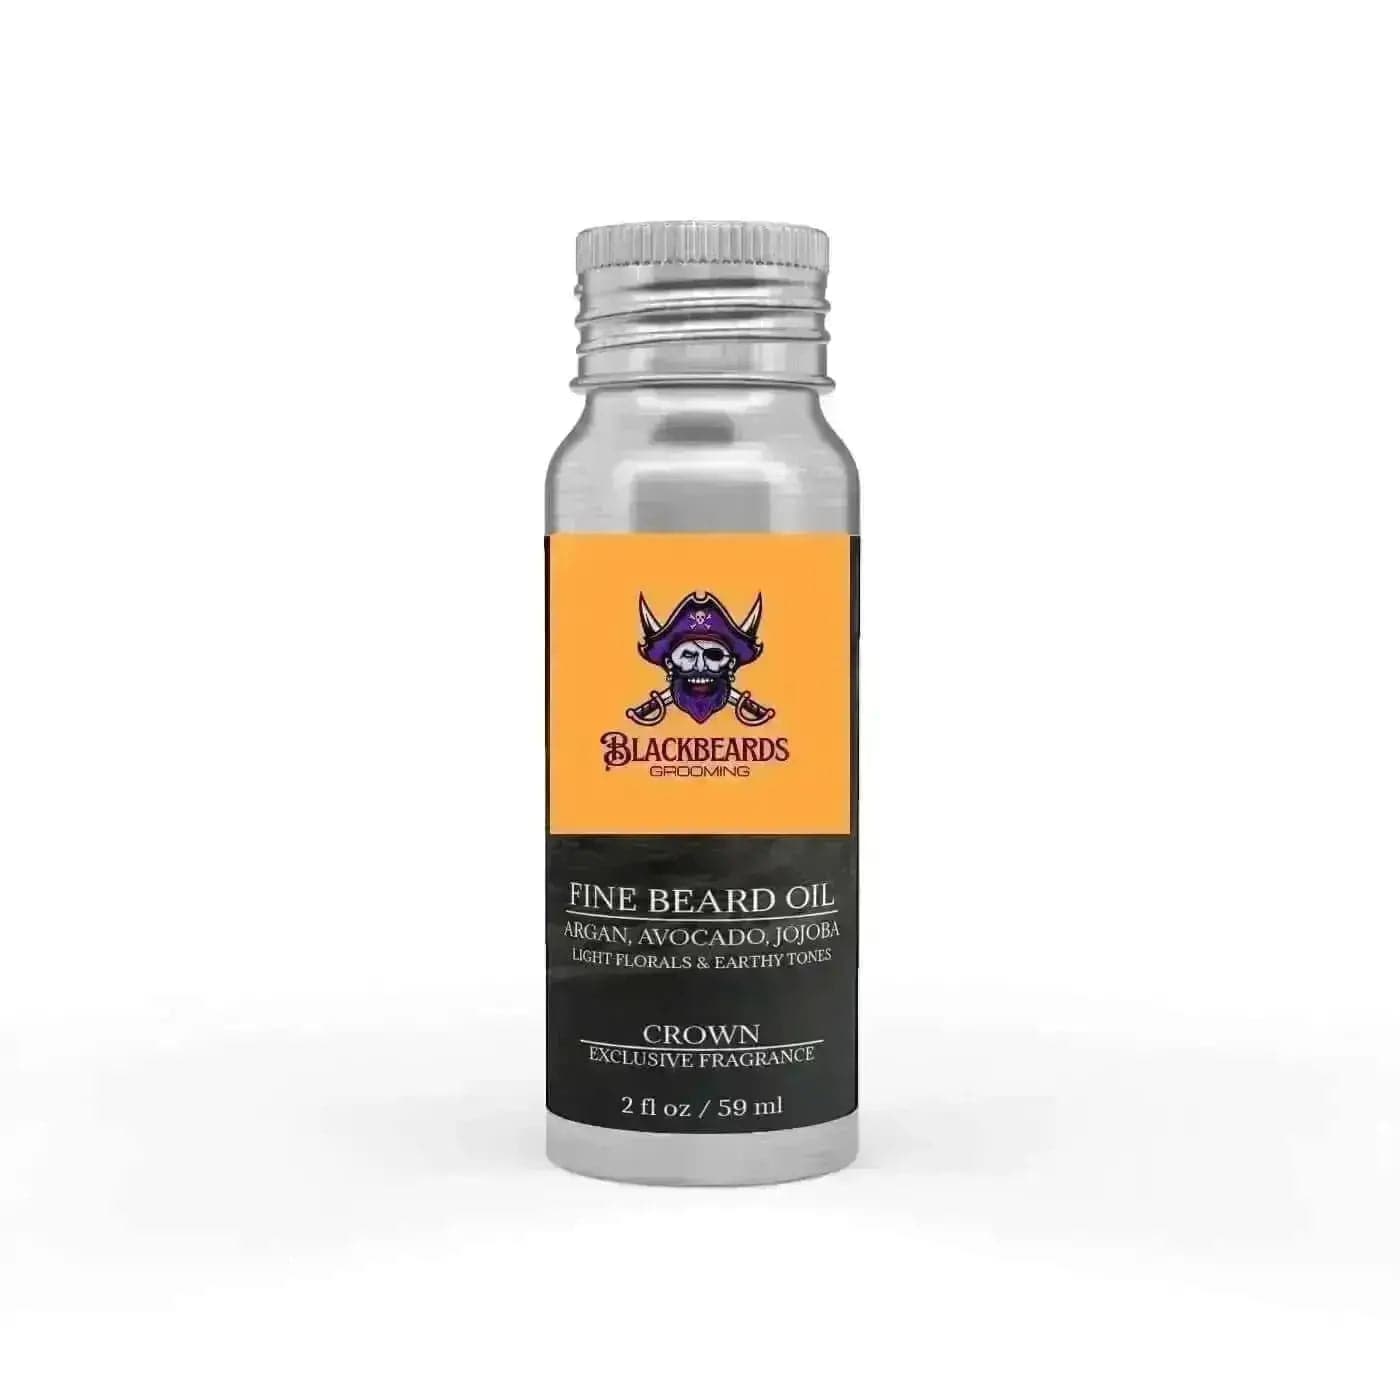 a bottle of beard oil on a white background